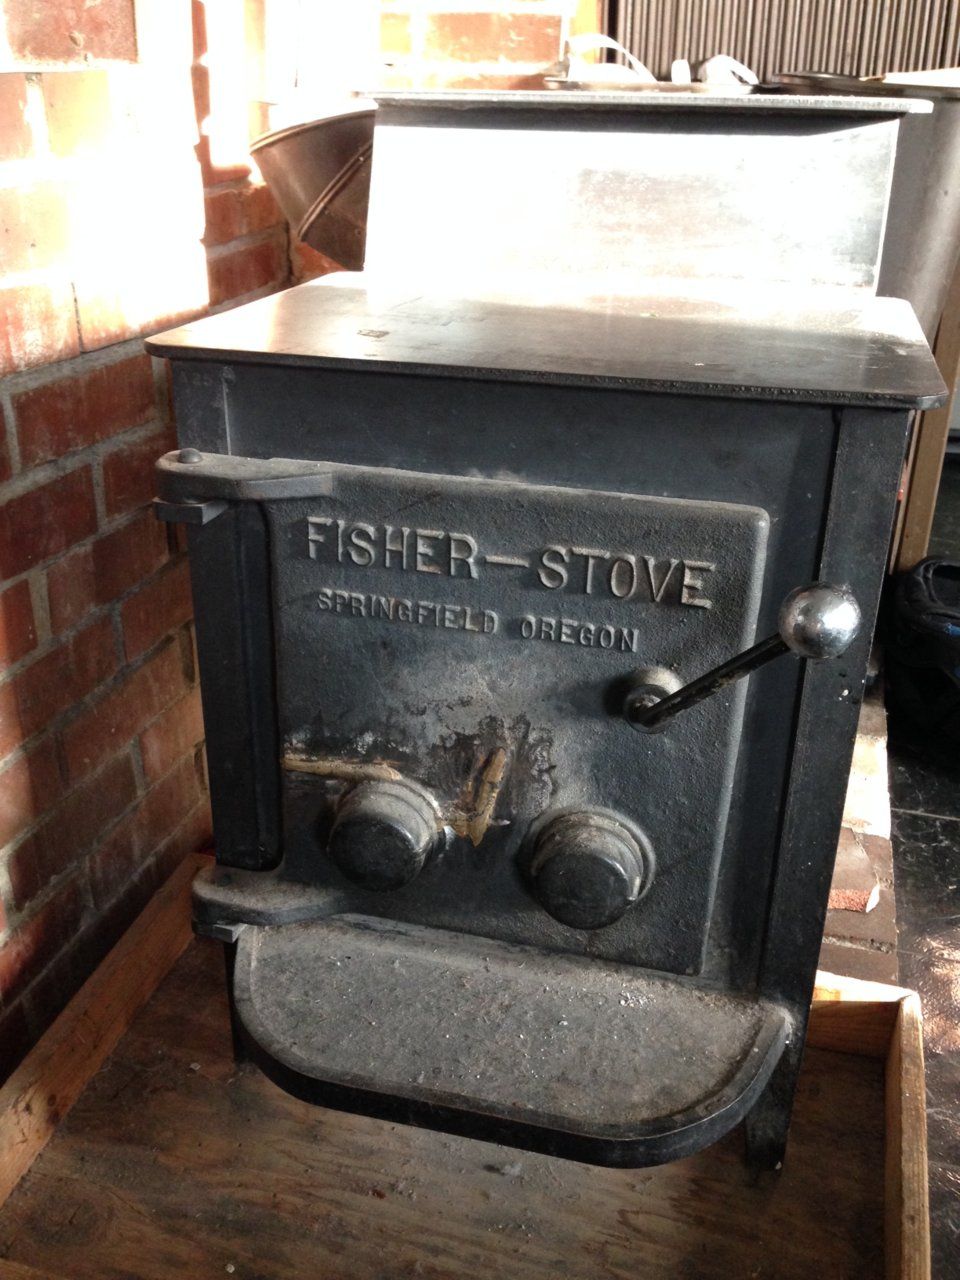 Fisher wood stove from the 70s? (though we likely bought